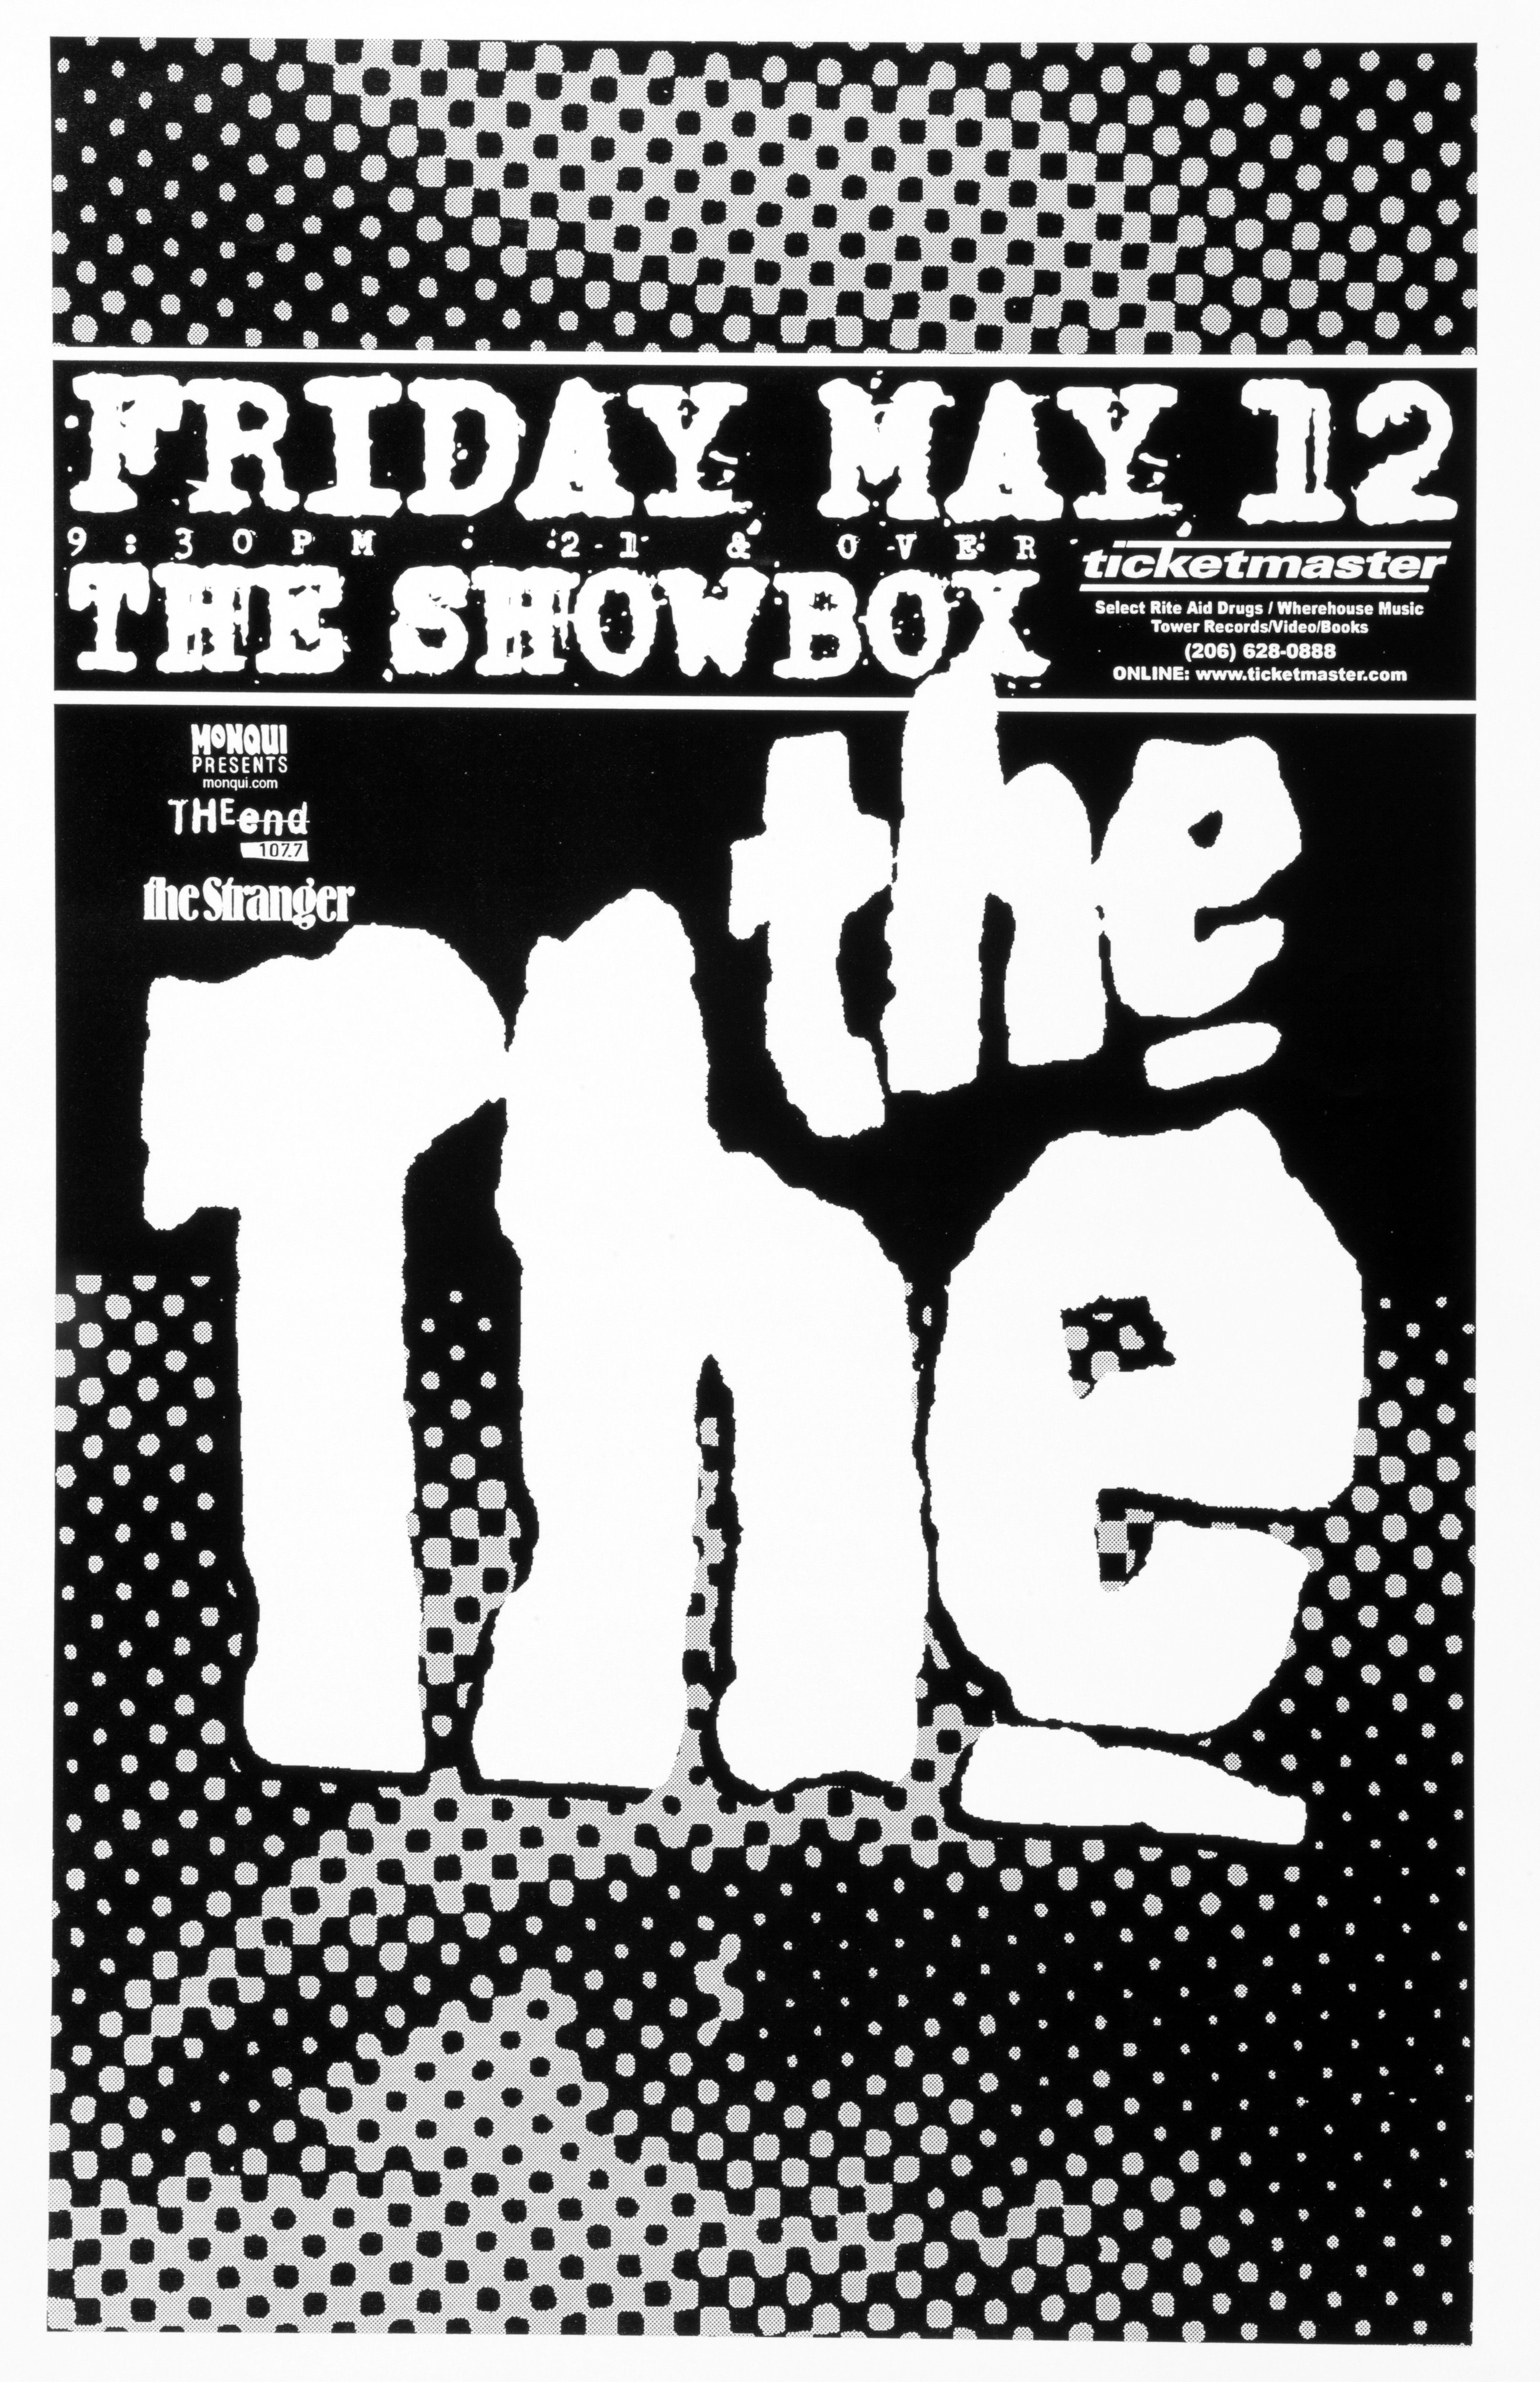 MXP-145.9 The The 1995 Showbox  May 12 Concert Poster